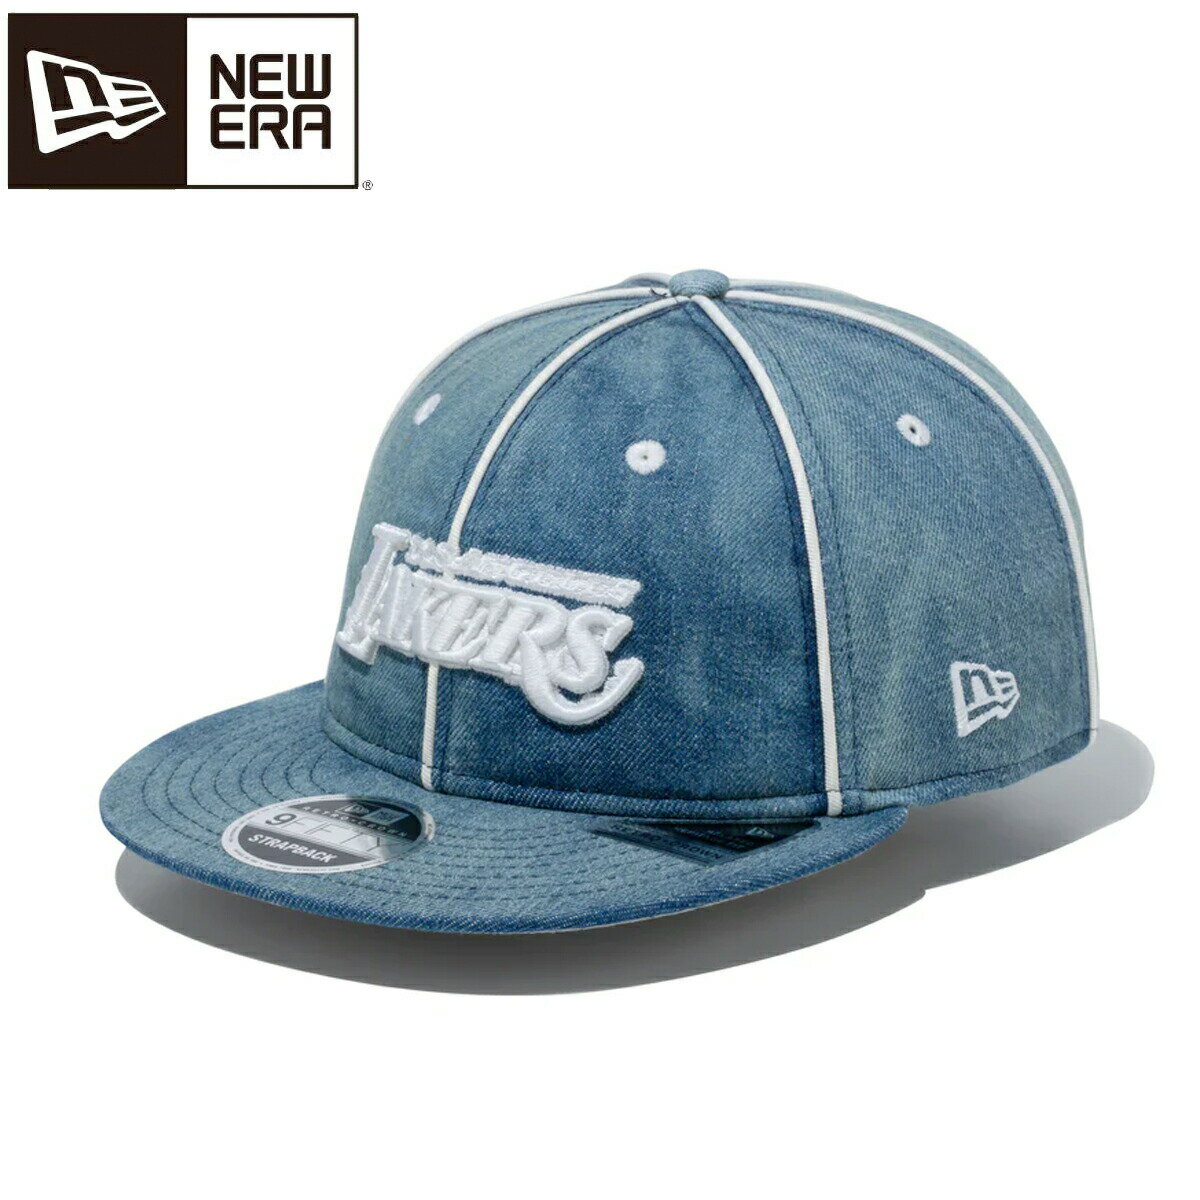 NEW ERA RC 9FIFTY LOS ANGELES LAKERS ニューエラ RC 9FIFTY ロサンゼルス・レイカーズ WASHED DENIM 13515713 1